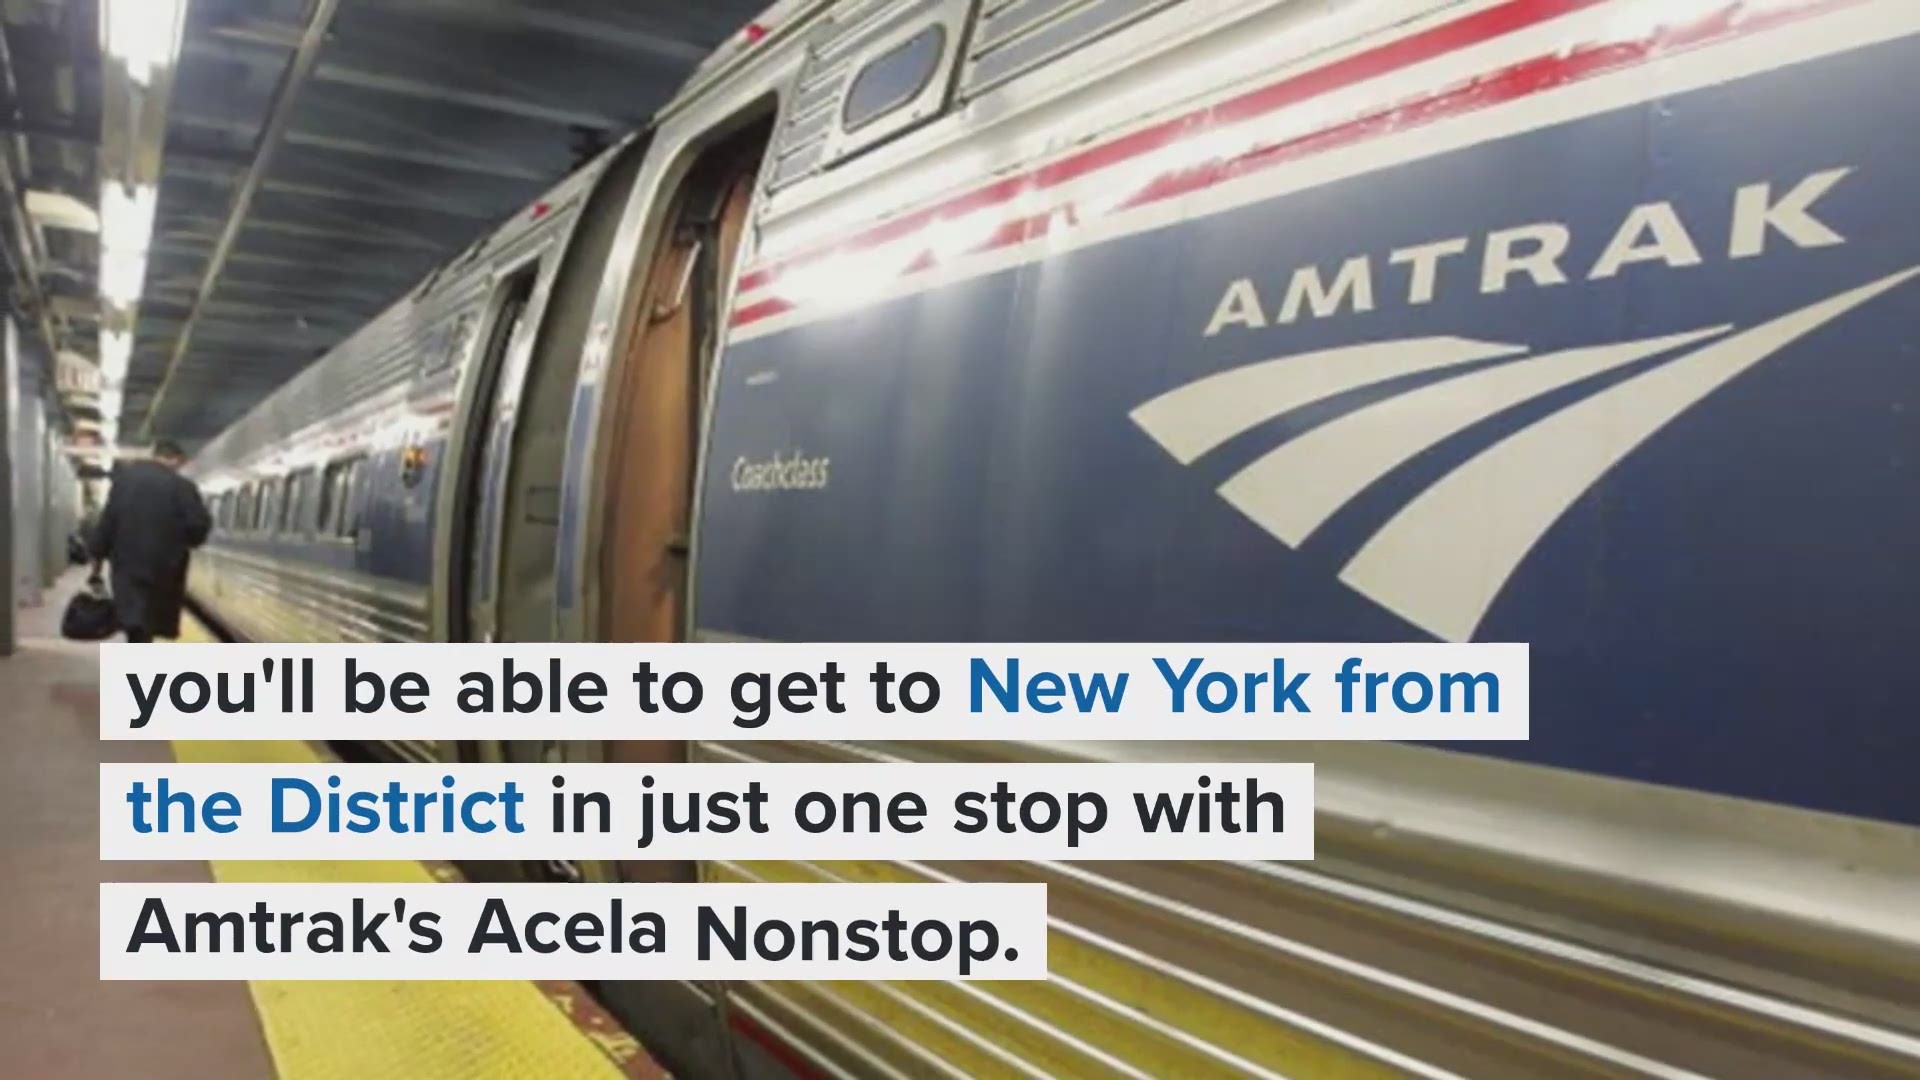 Starting in September, you'll be able to get from the District to New York in just one stop with Amtrak's Acela nonstop service. The new service begins Sept. 23 from Union Station and New York Penn Station. Tickets are available now.